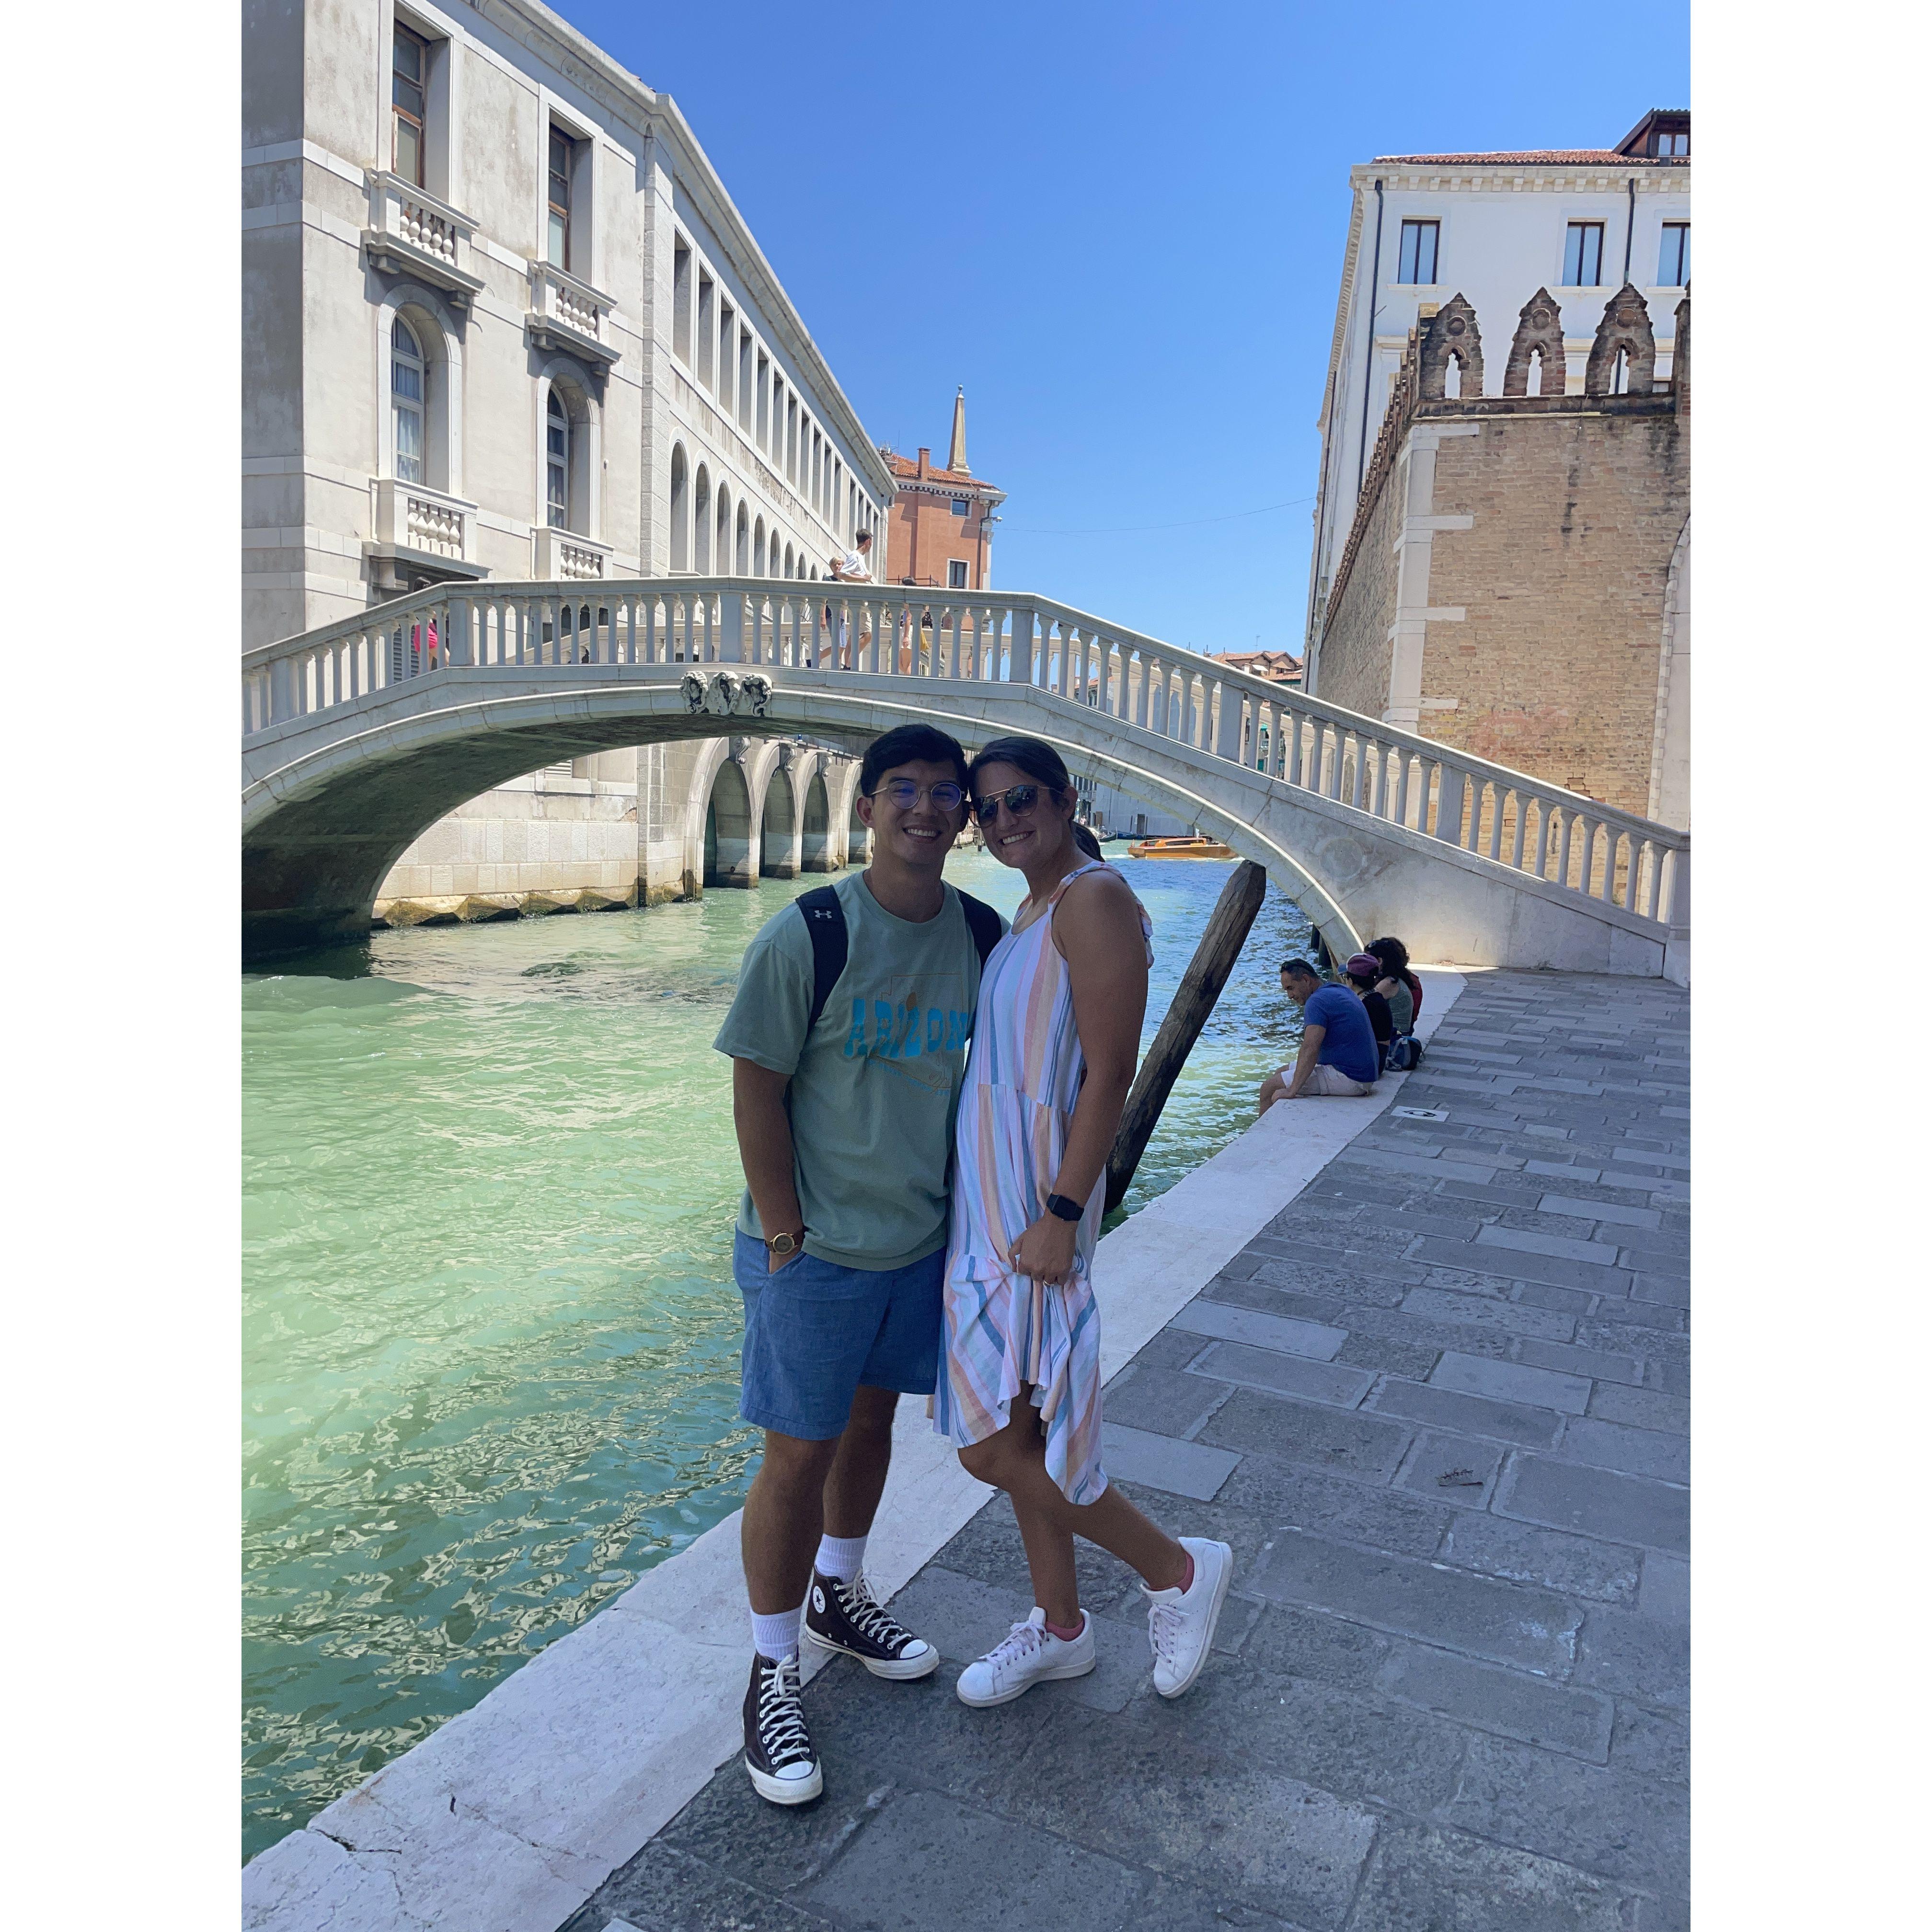 Our first international trip to Italy!